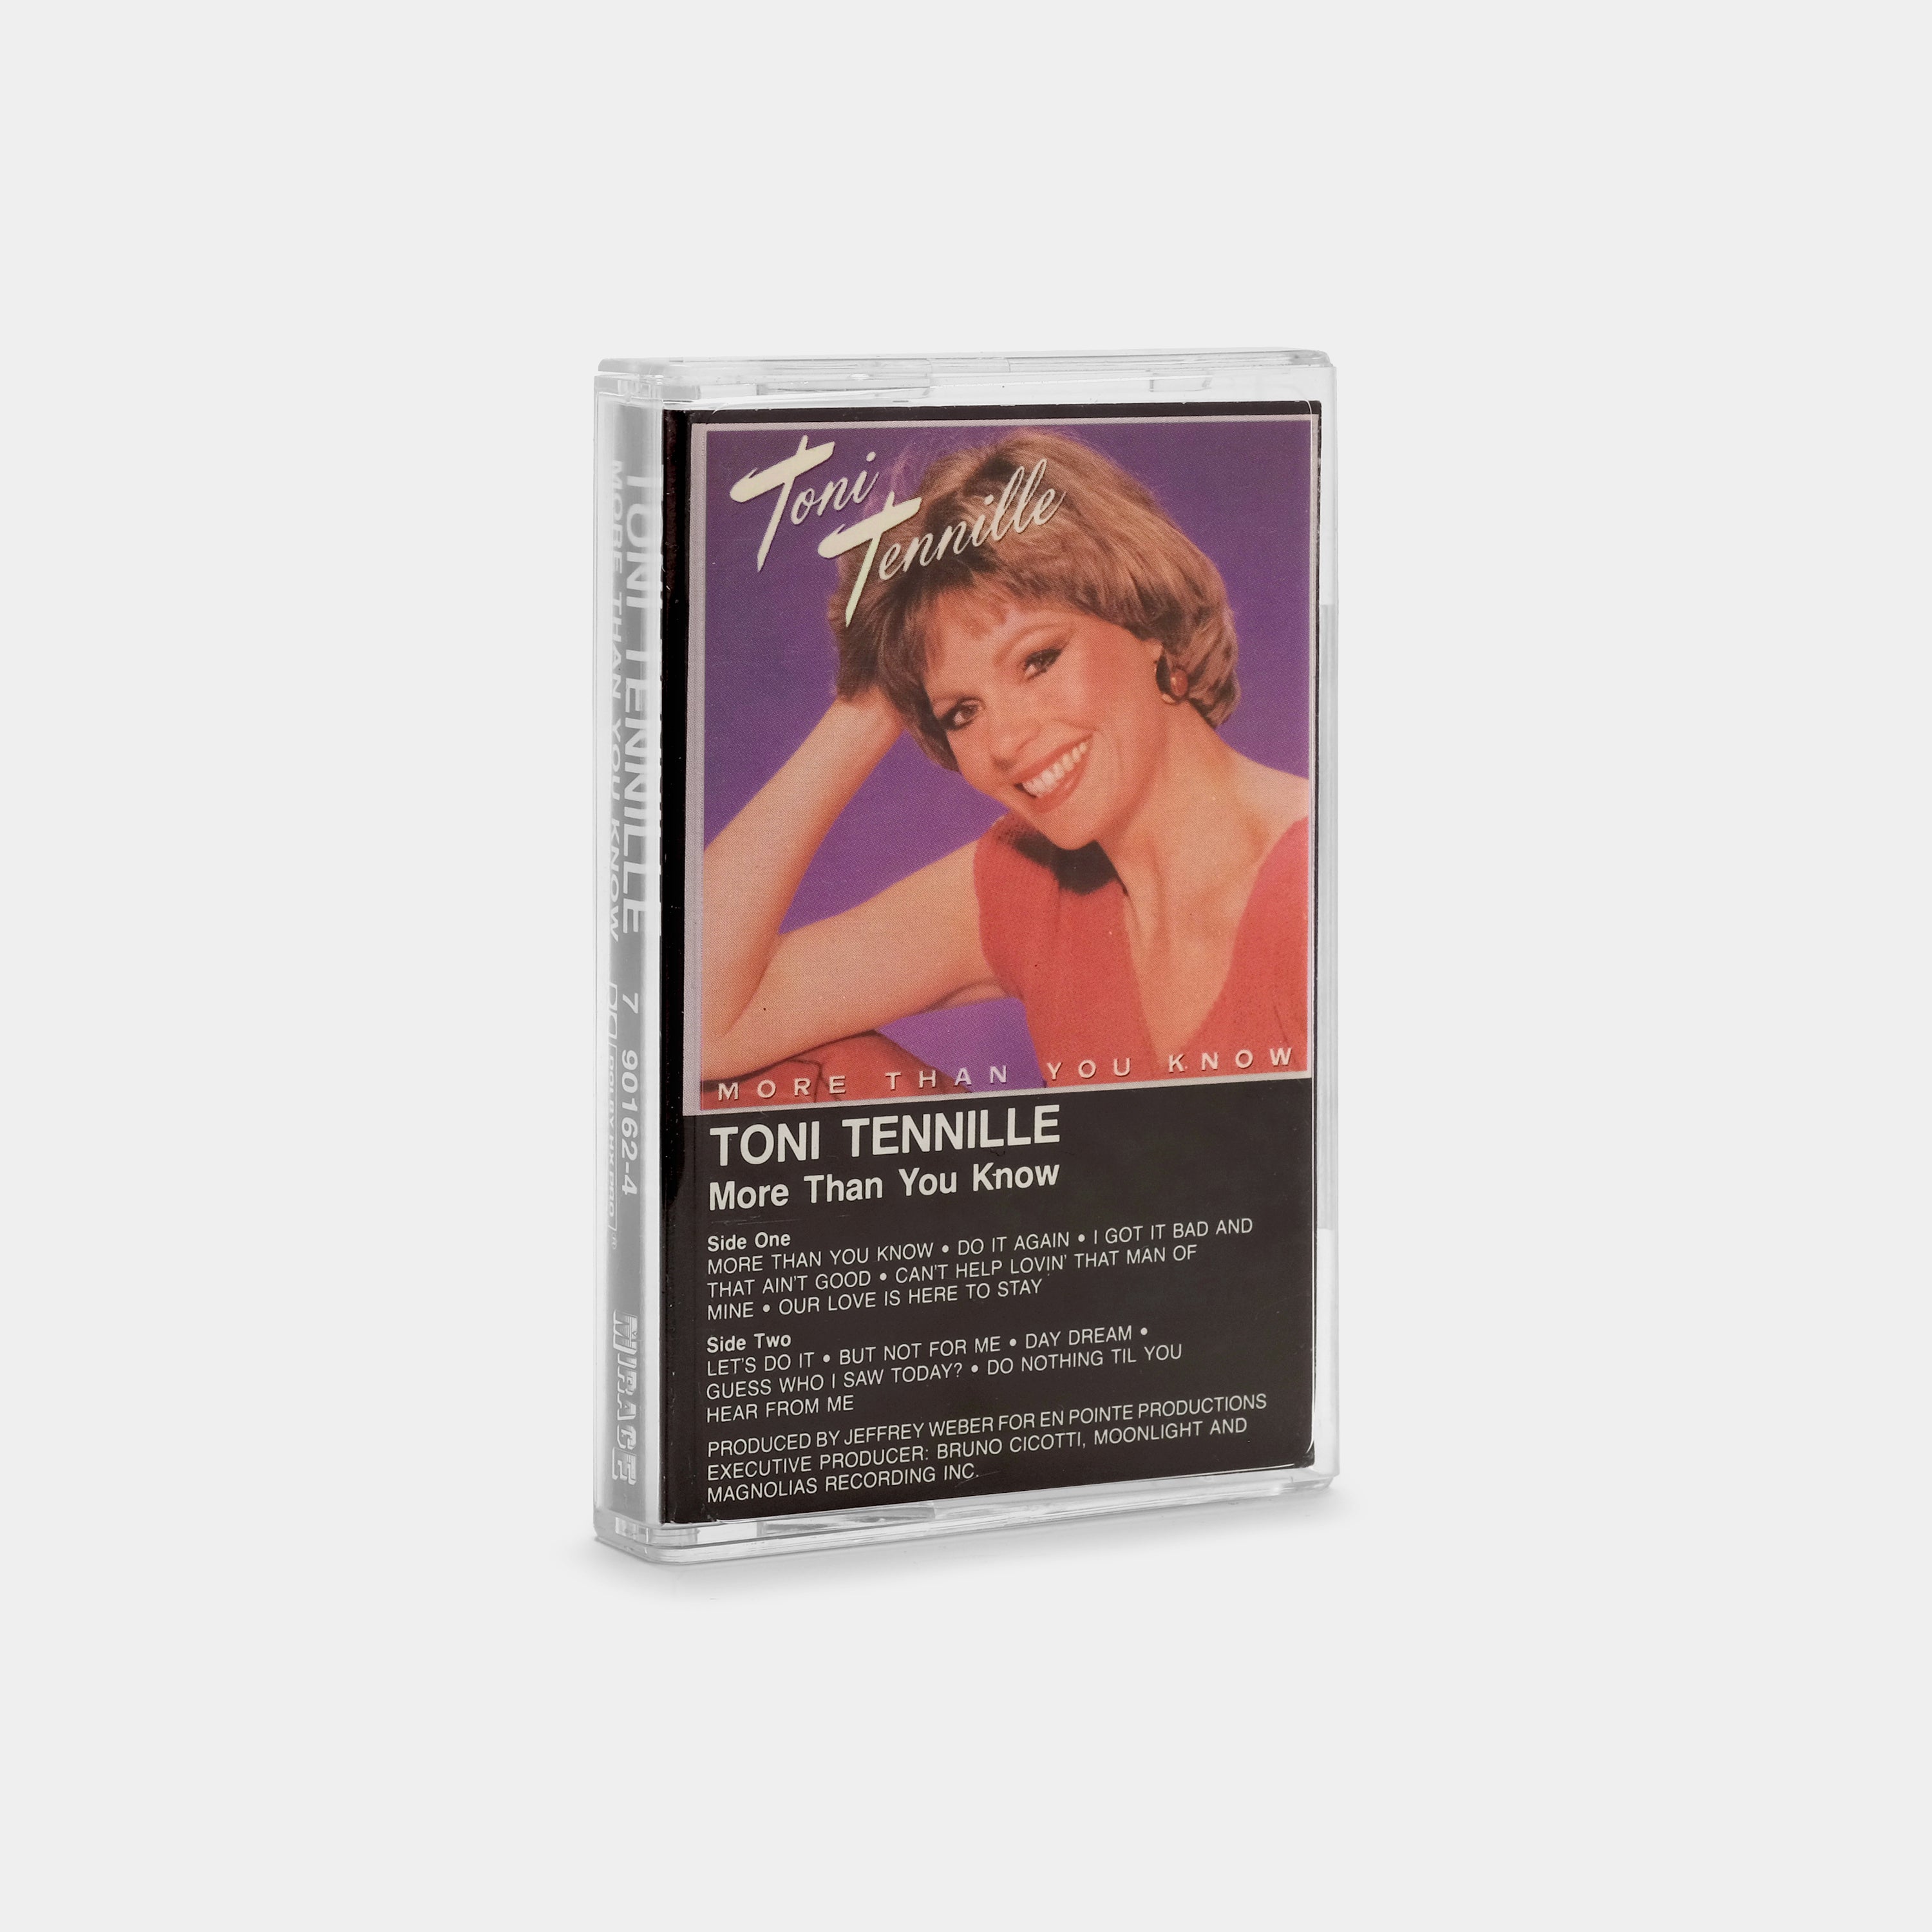 Toni Tennille - More Than You Know Cassette Tape